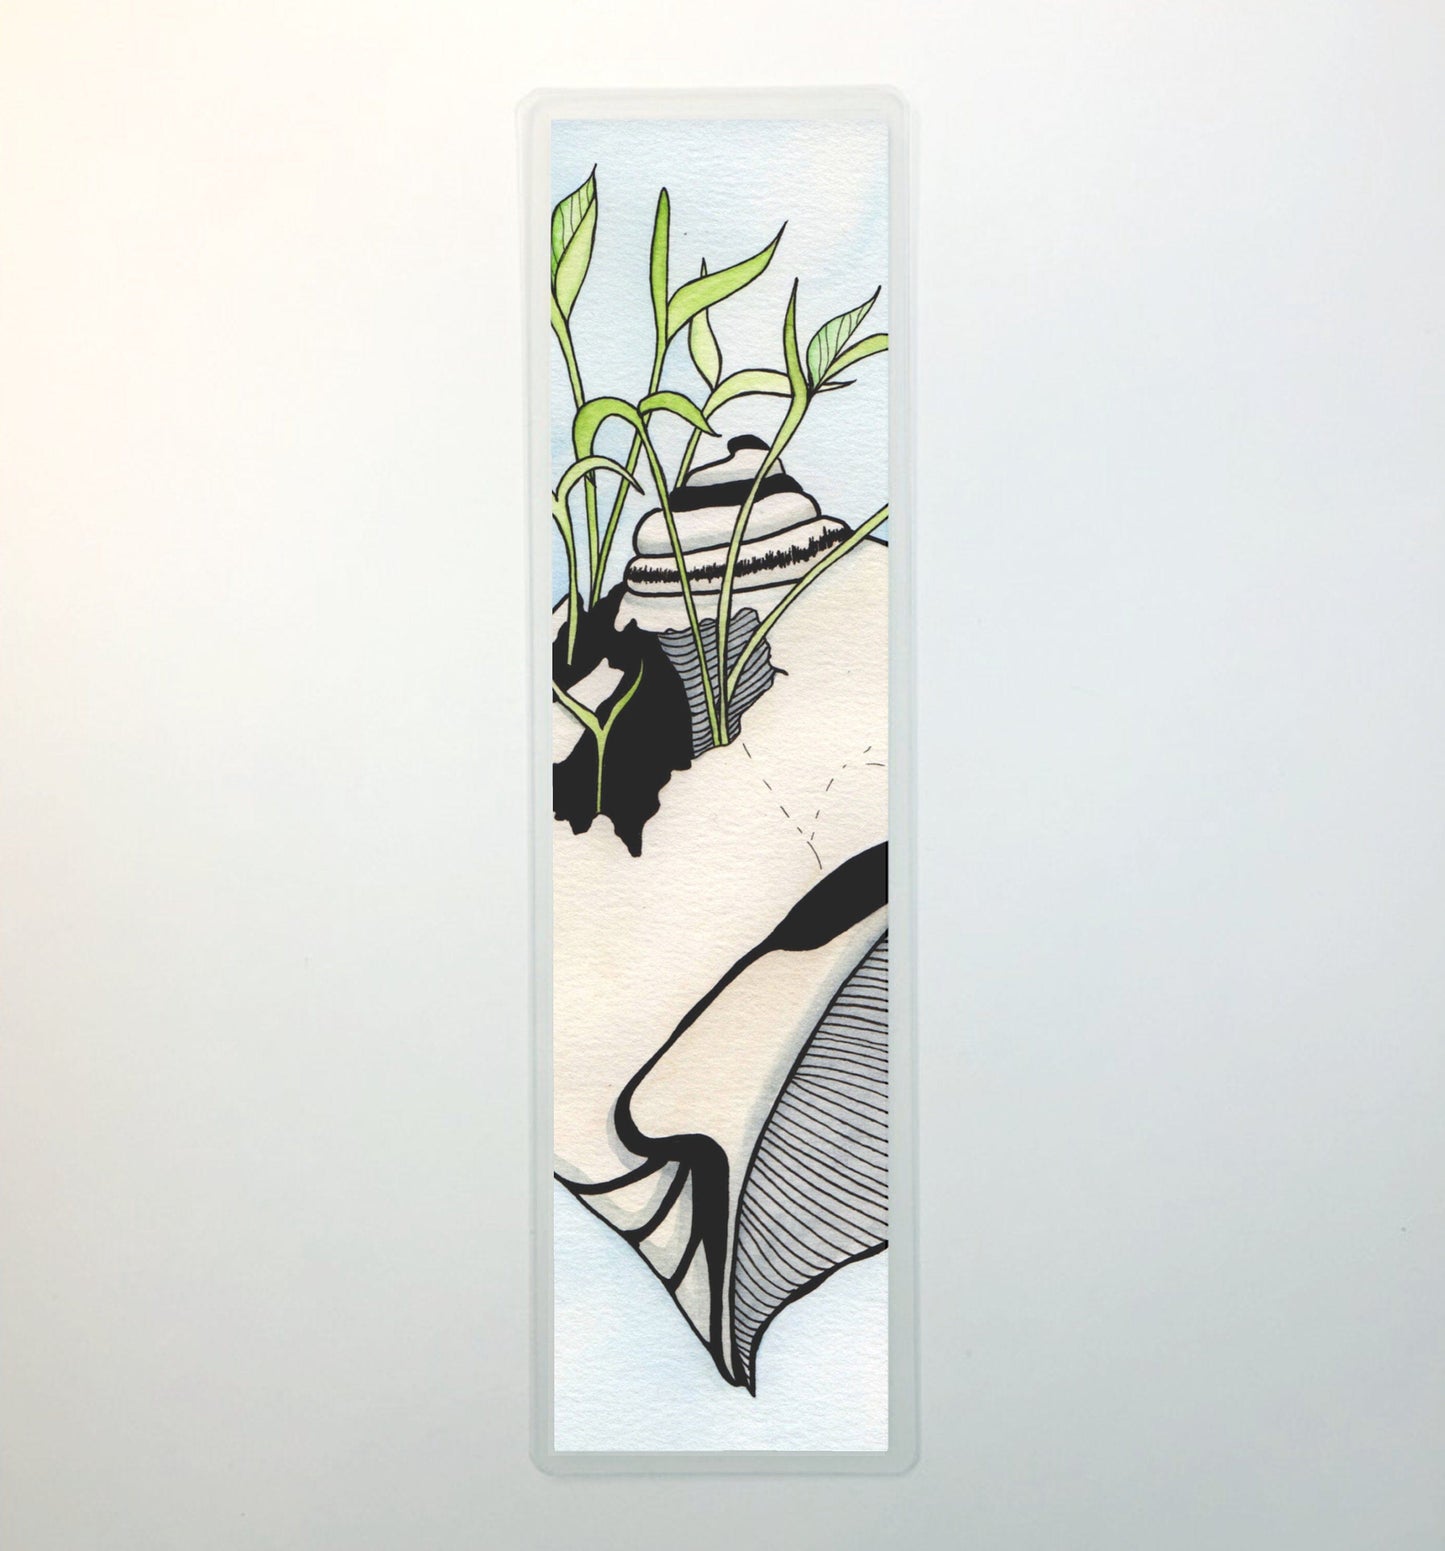 PinkPolish Design Bookmarks "Tenacious Sprout" 2-Sided Bookmark